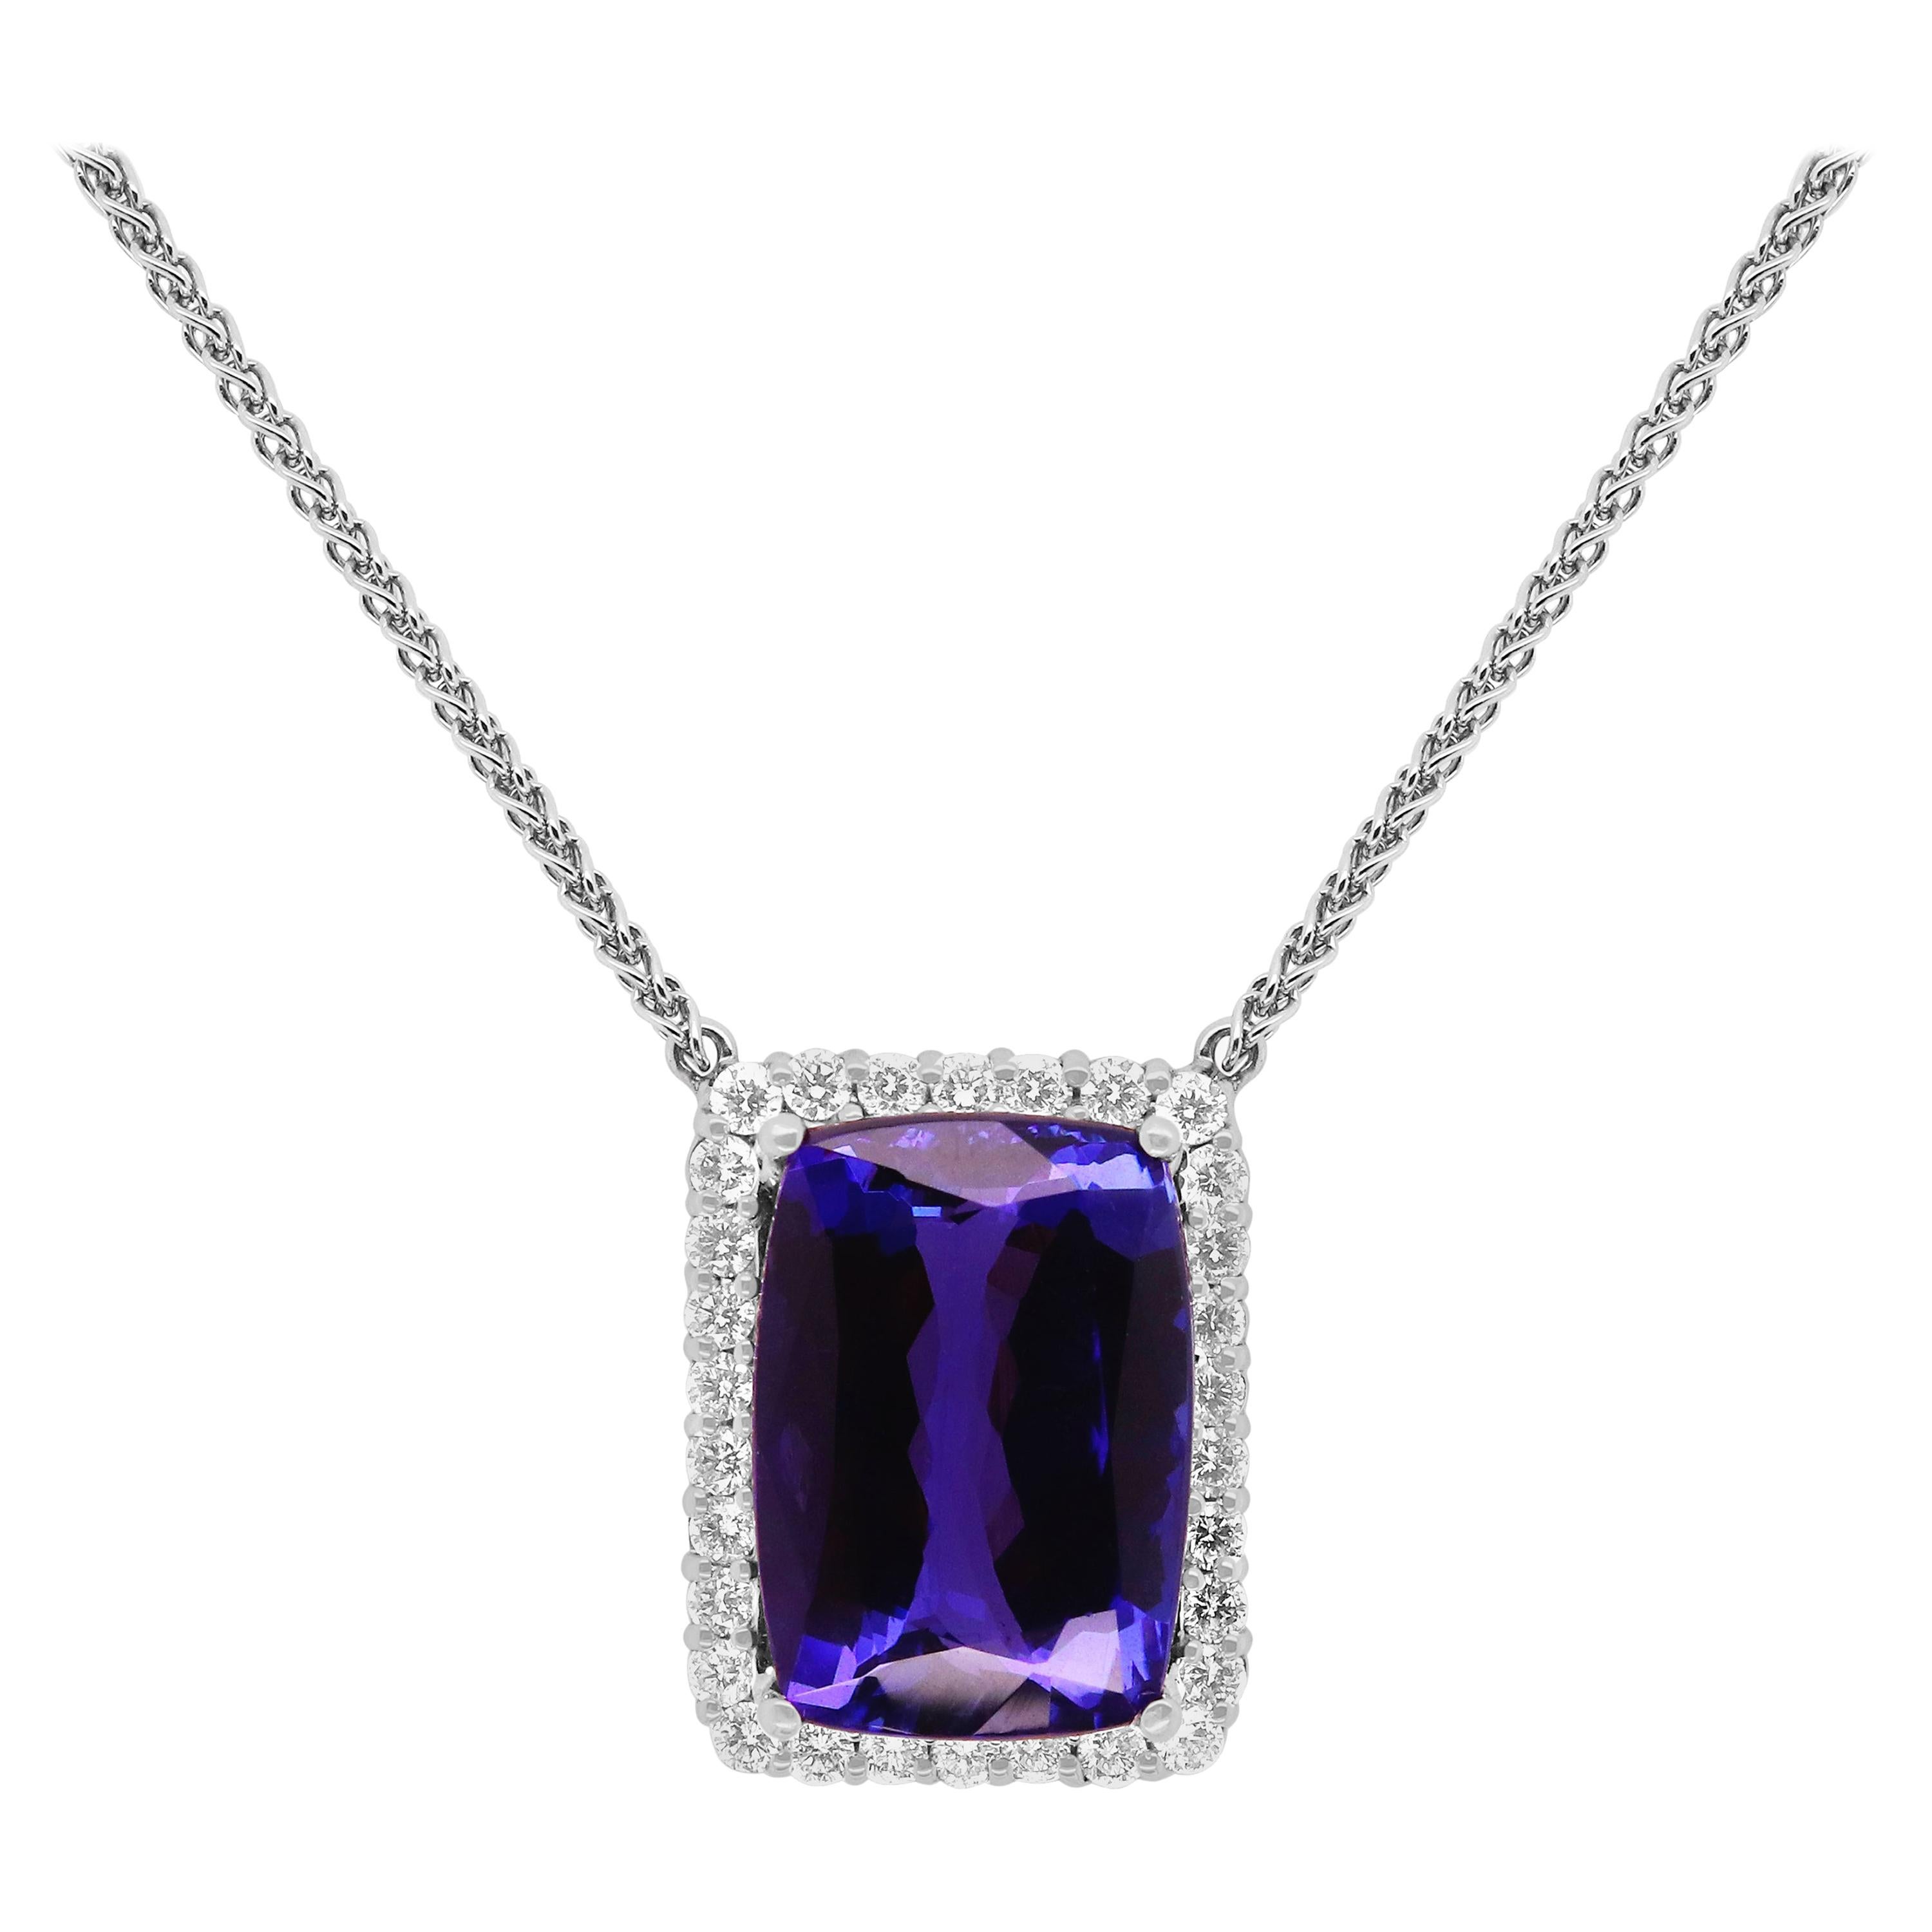 Beautiful Cushion Cut Diamond Necklace, 27 Carats Total! For Sale at ...